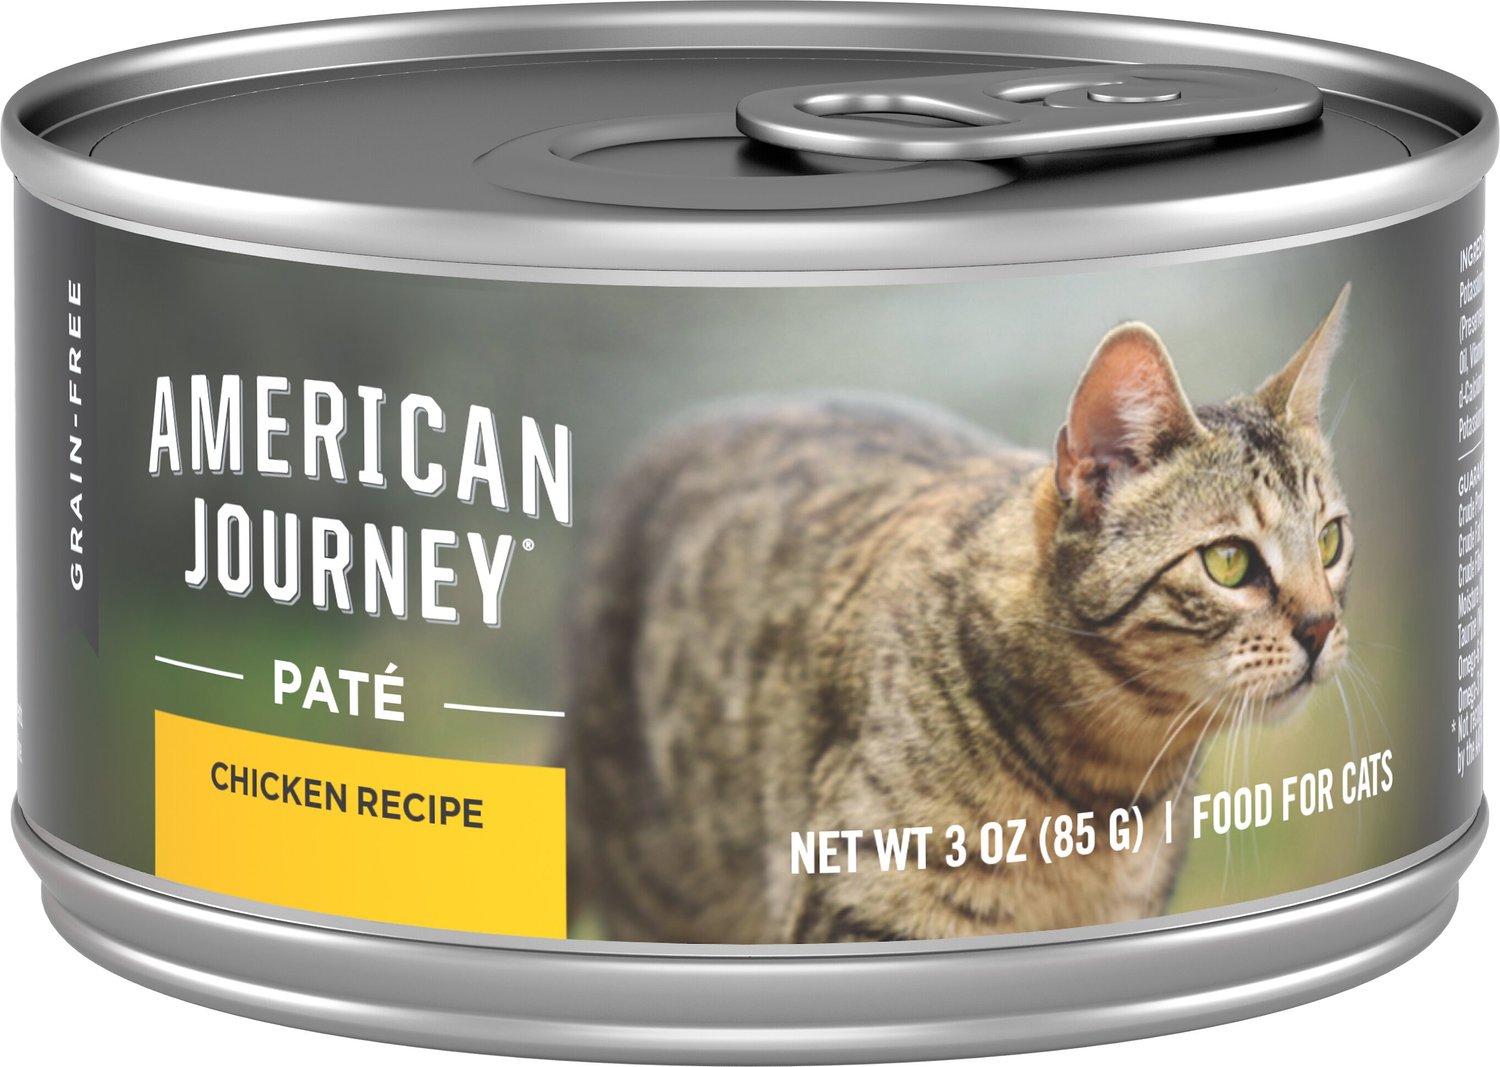 AMERICAN JOURNEY Pate Chicken Recipe GrainFree Canned Cat Food, 3oz